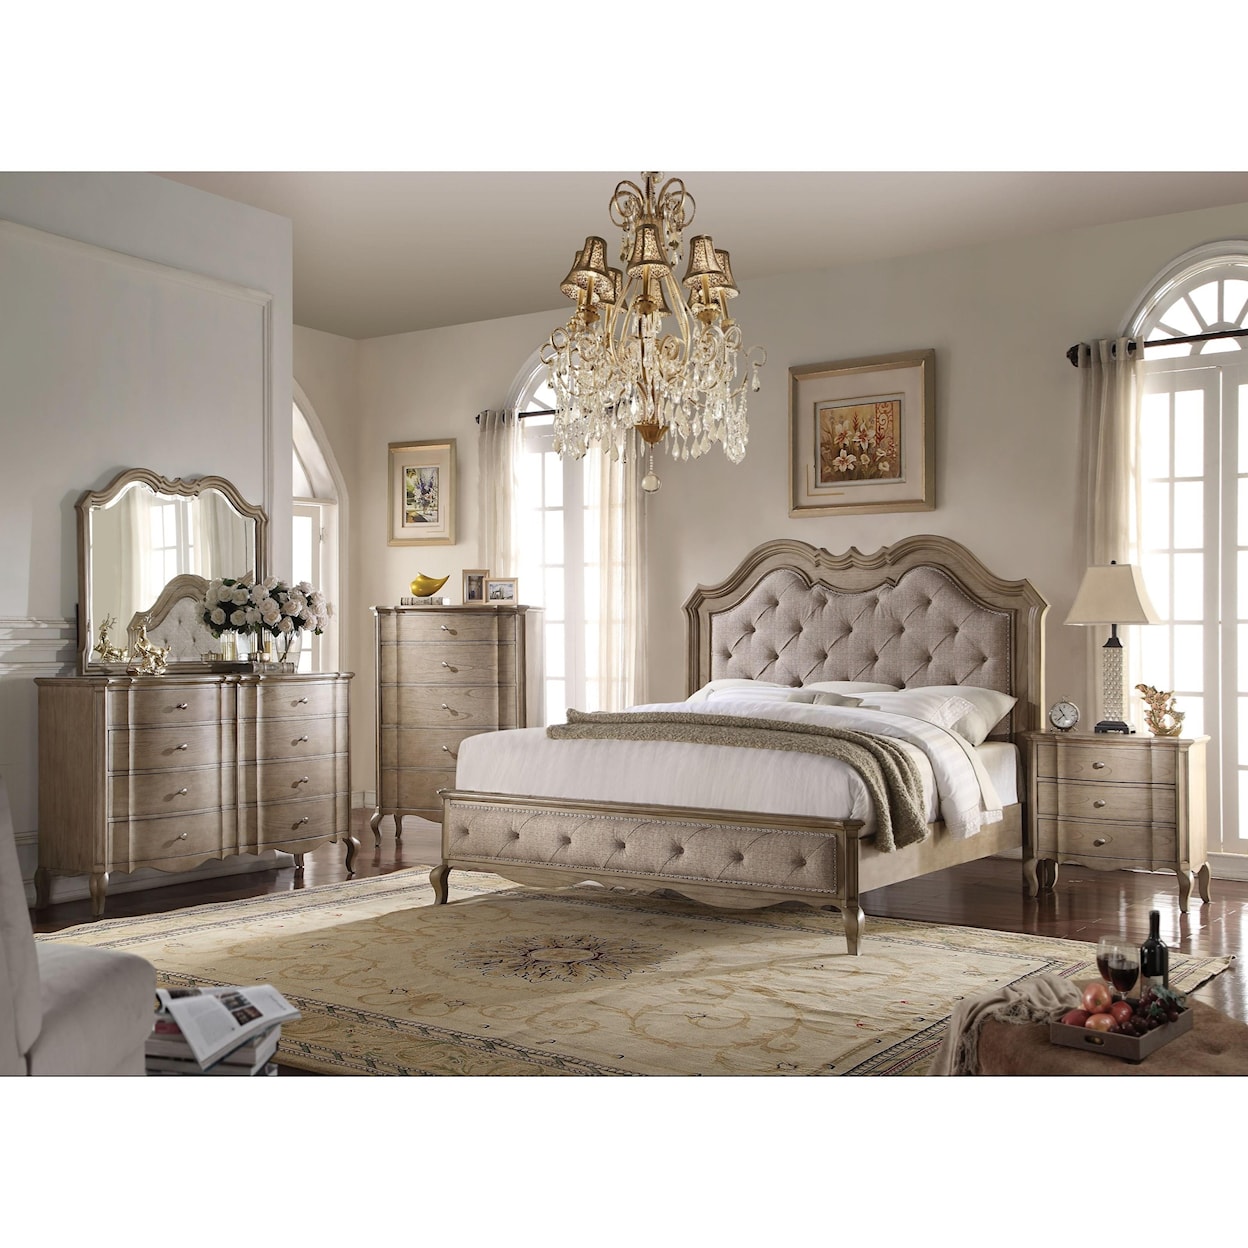 Acme Furniture Chelmsford Eastern King Bed